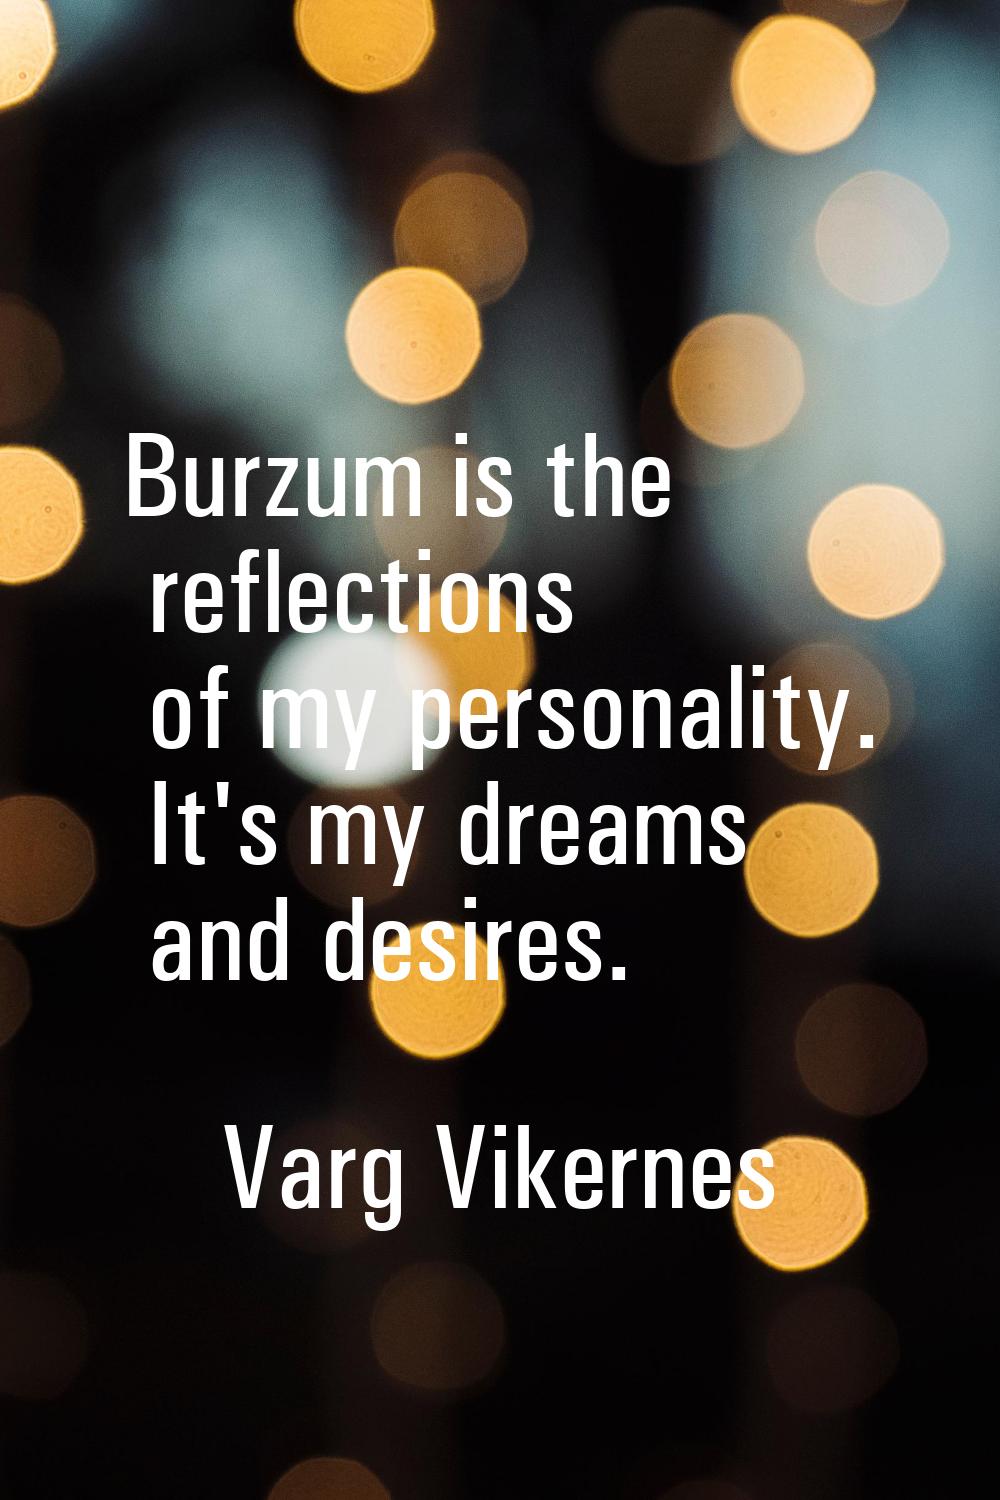 Burzum is the reflections of my personality. It's my dreams and desires.